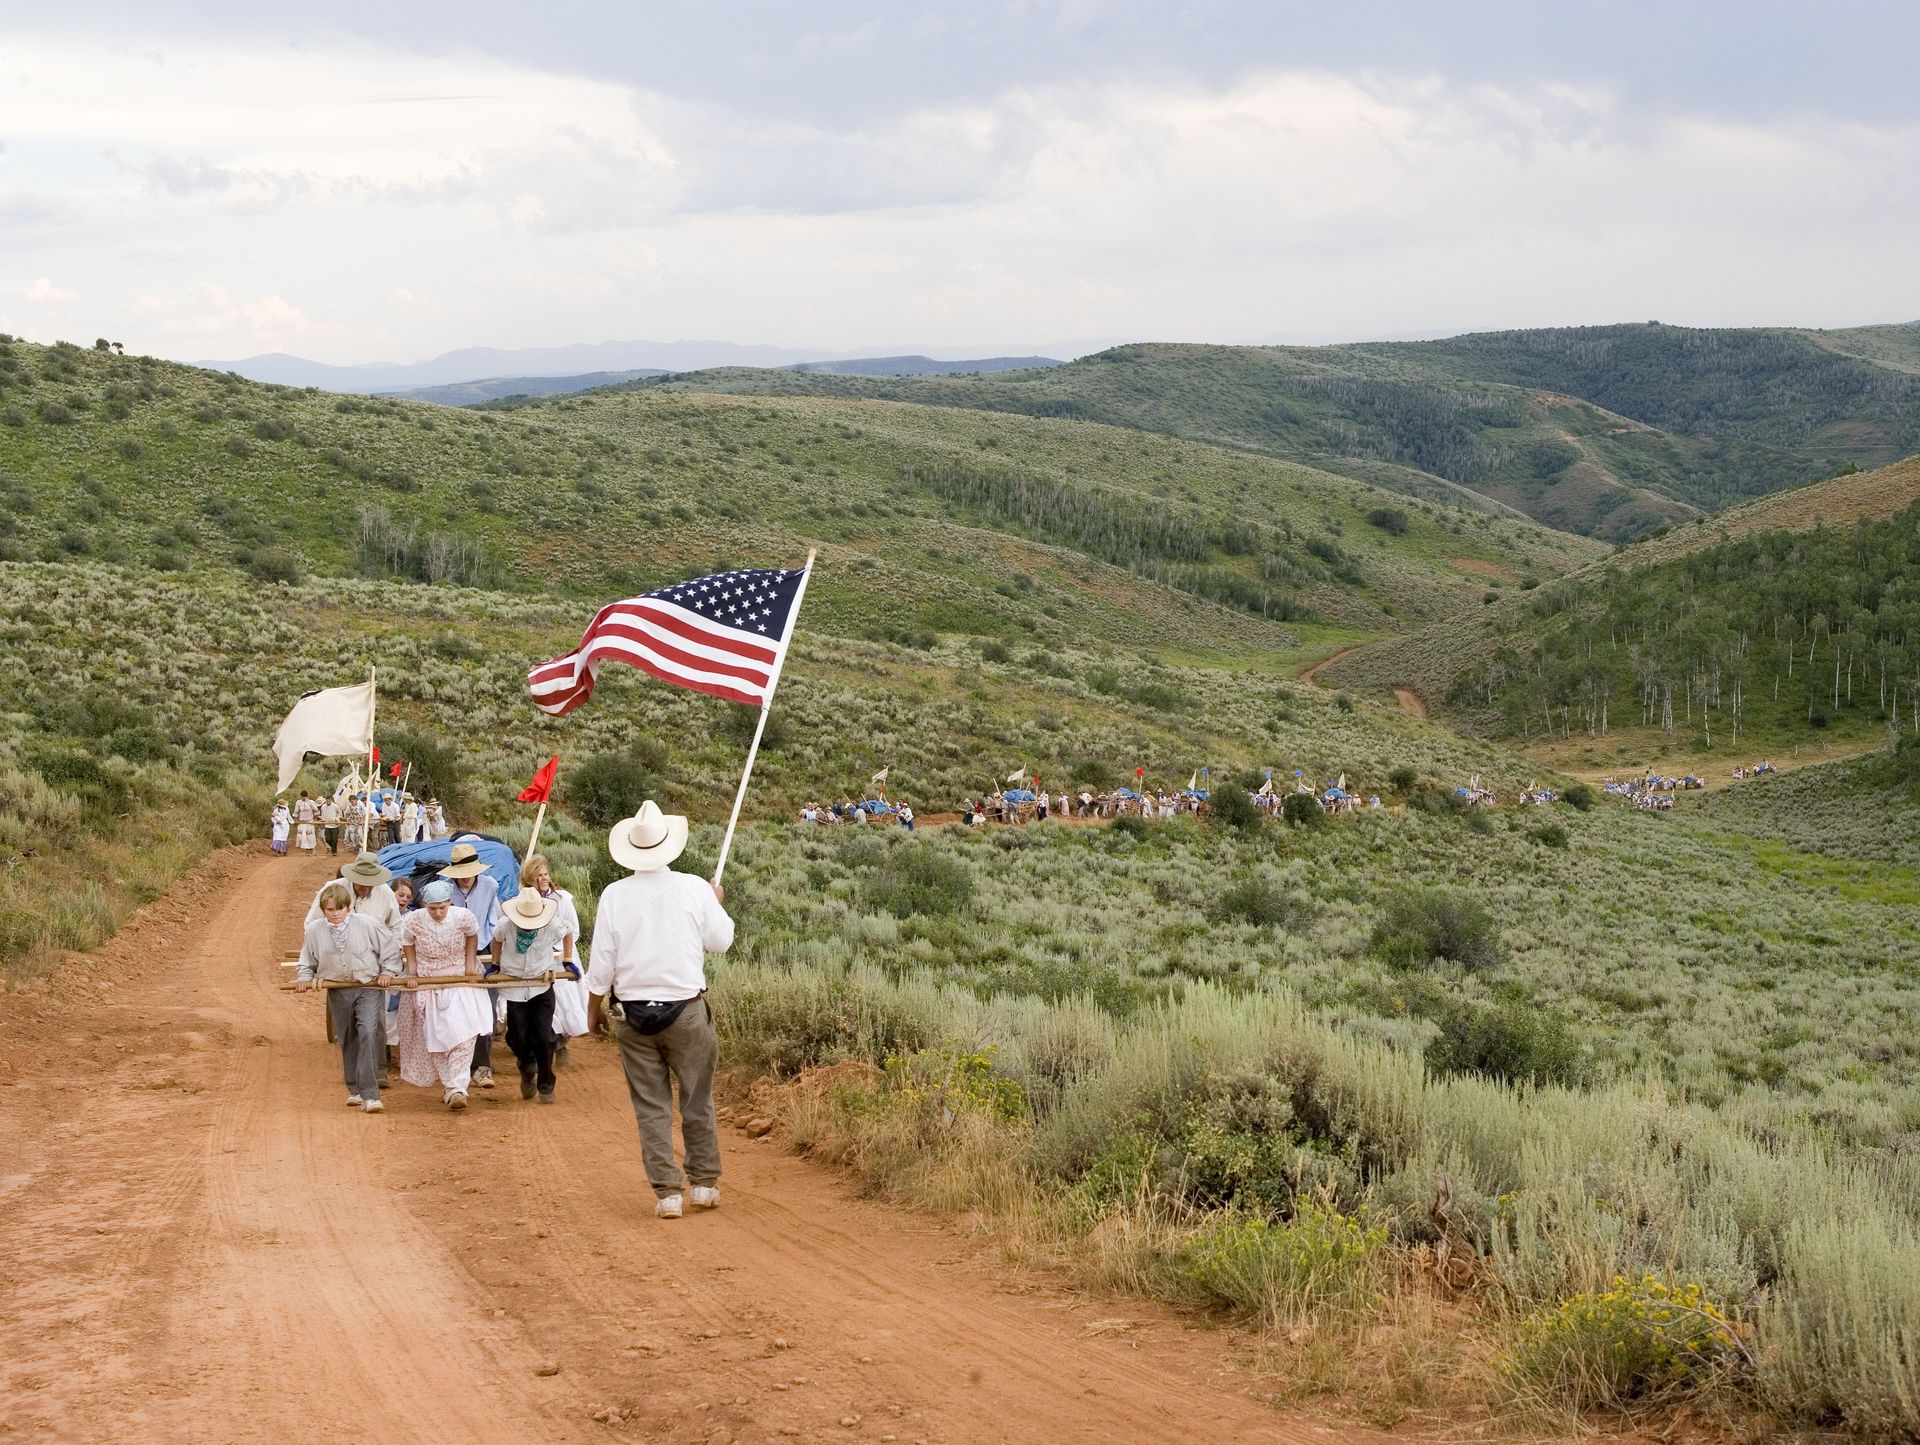 A man waves an American flag as he walks in front of a group of men and women pulling handcarts up a hill.